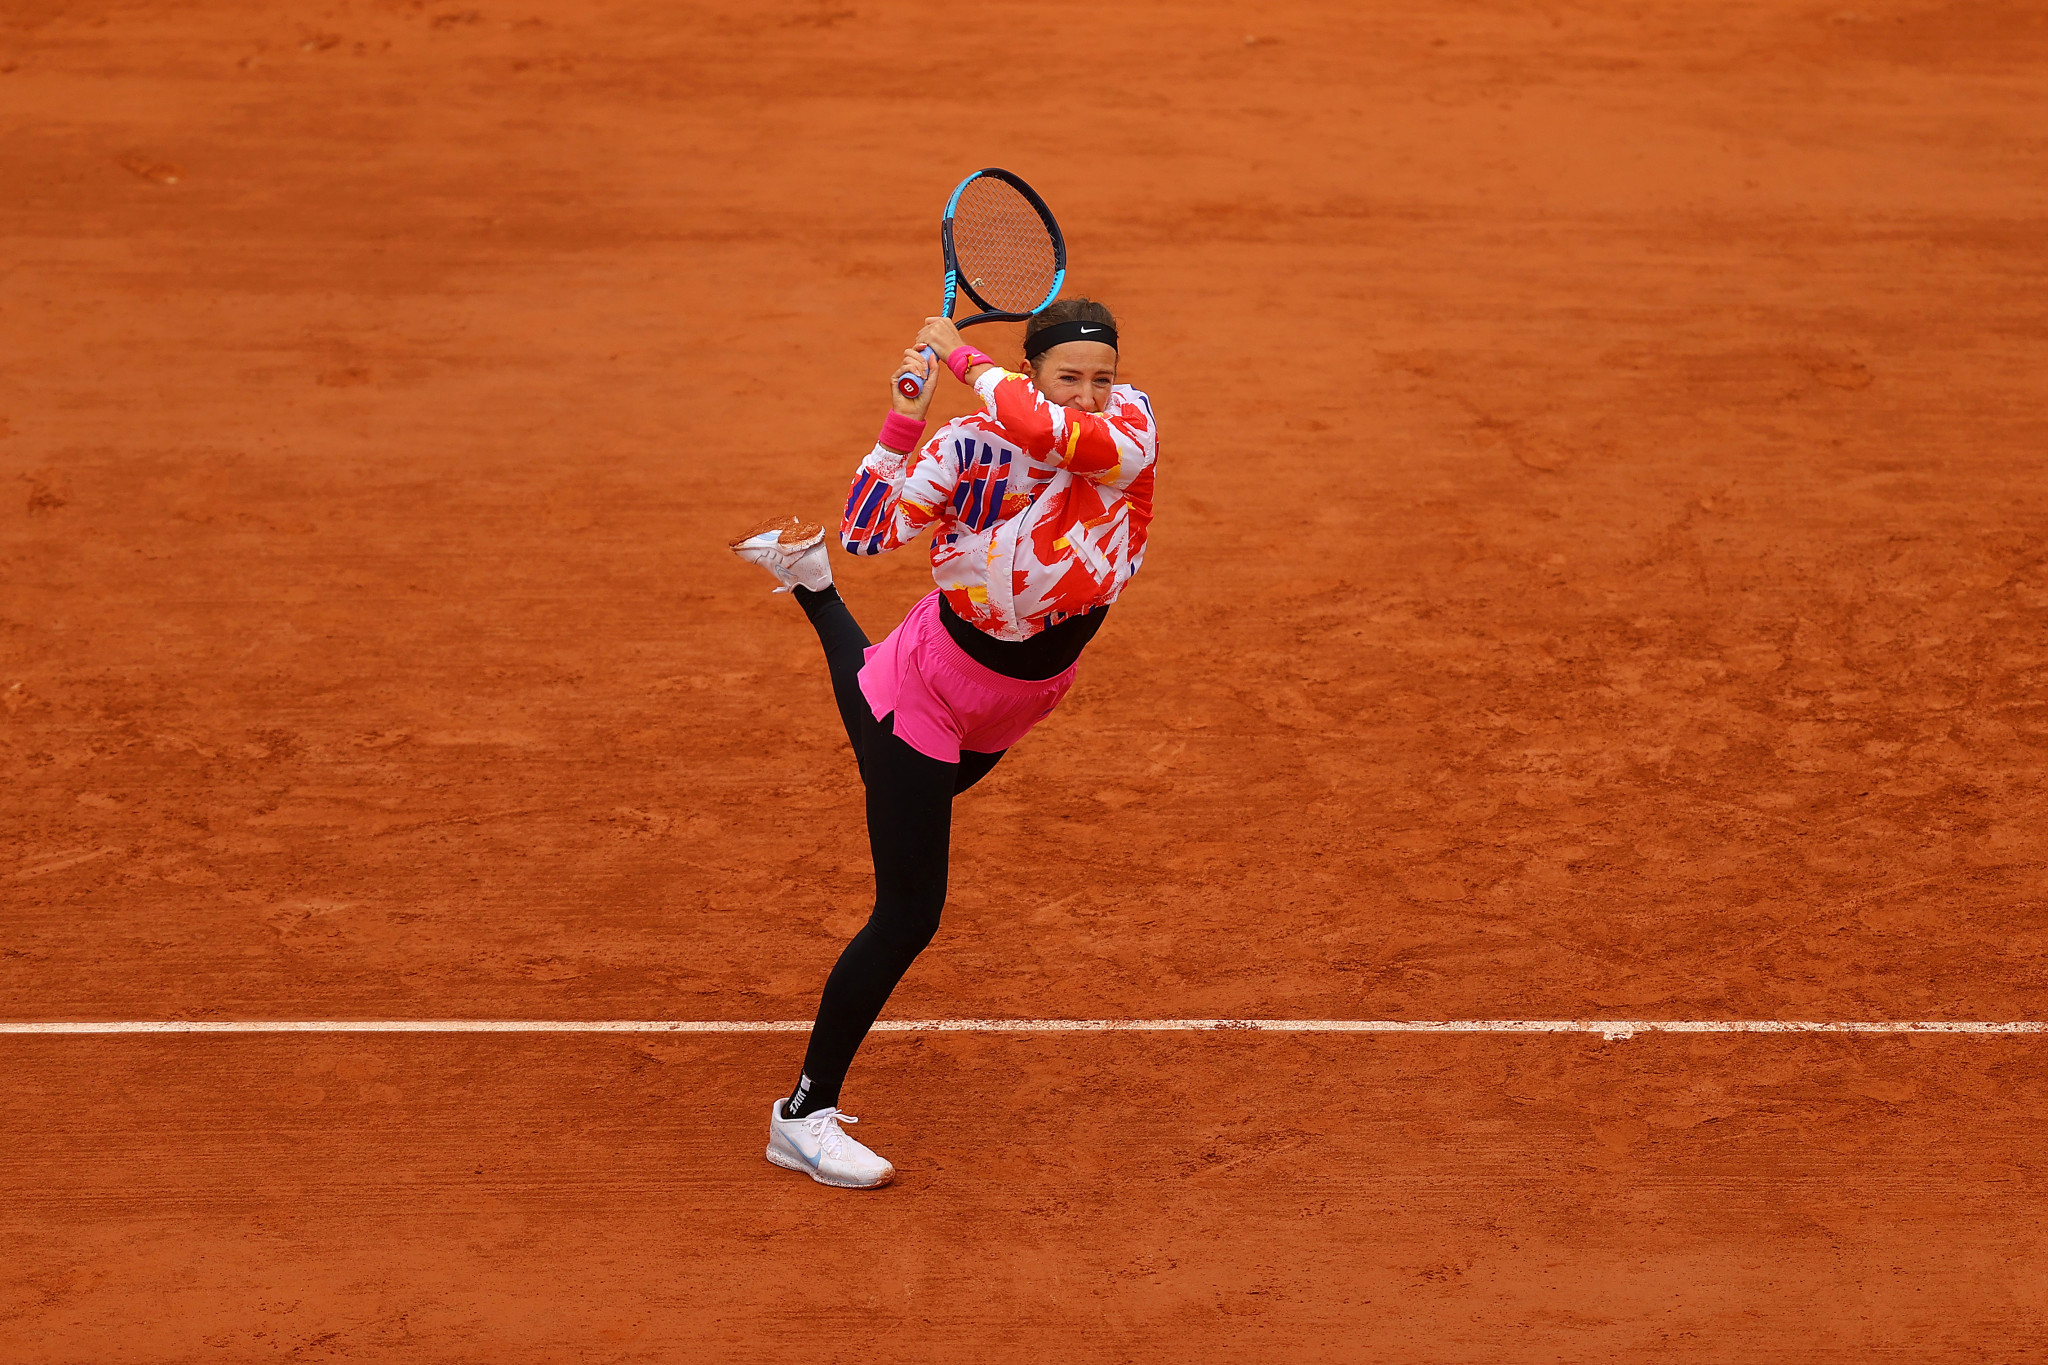 Victoria Azarenka, who was wrapped up on a chilly day in Paris, is through to round two ©Getty Images